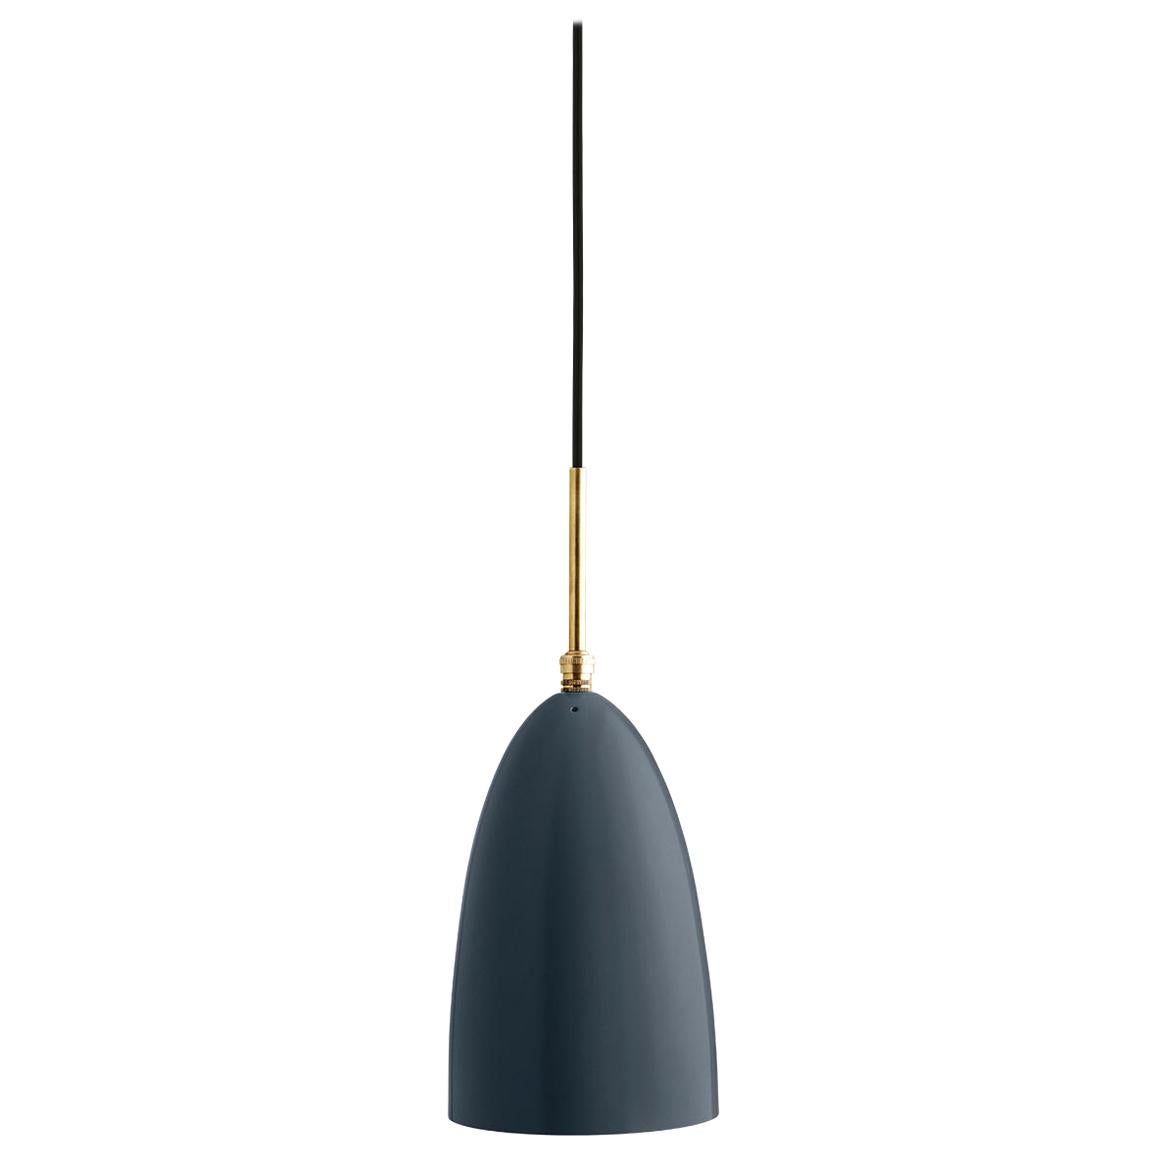 The Gräshoppa pendant has emerged from Greta M. Grossman’s original lamp design from 1947, using the signature steel shade that successfully combines lightness and functionality into a modern yet organic character. The whimsical design language is